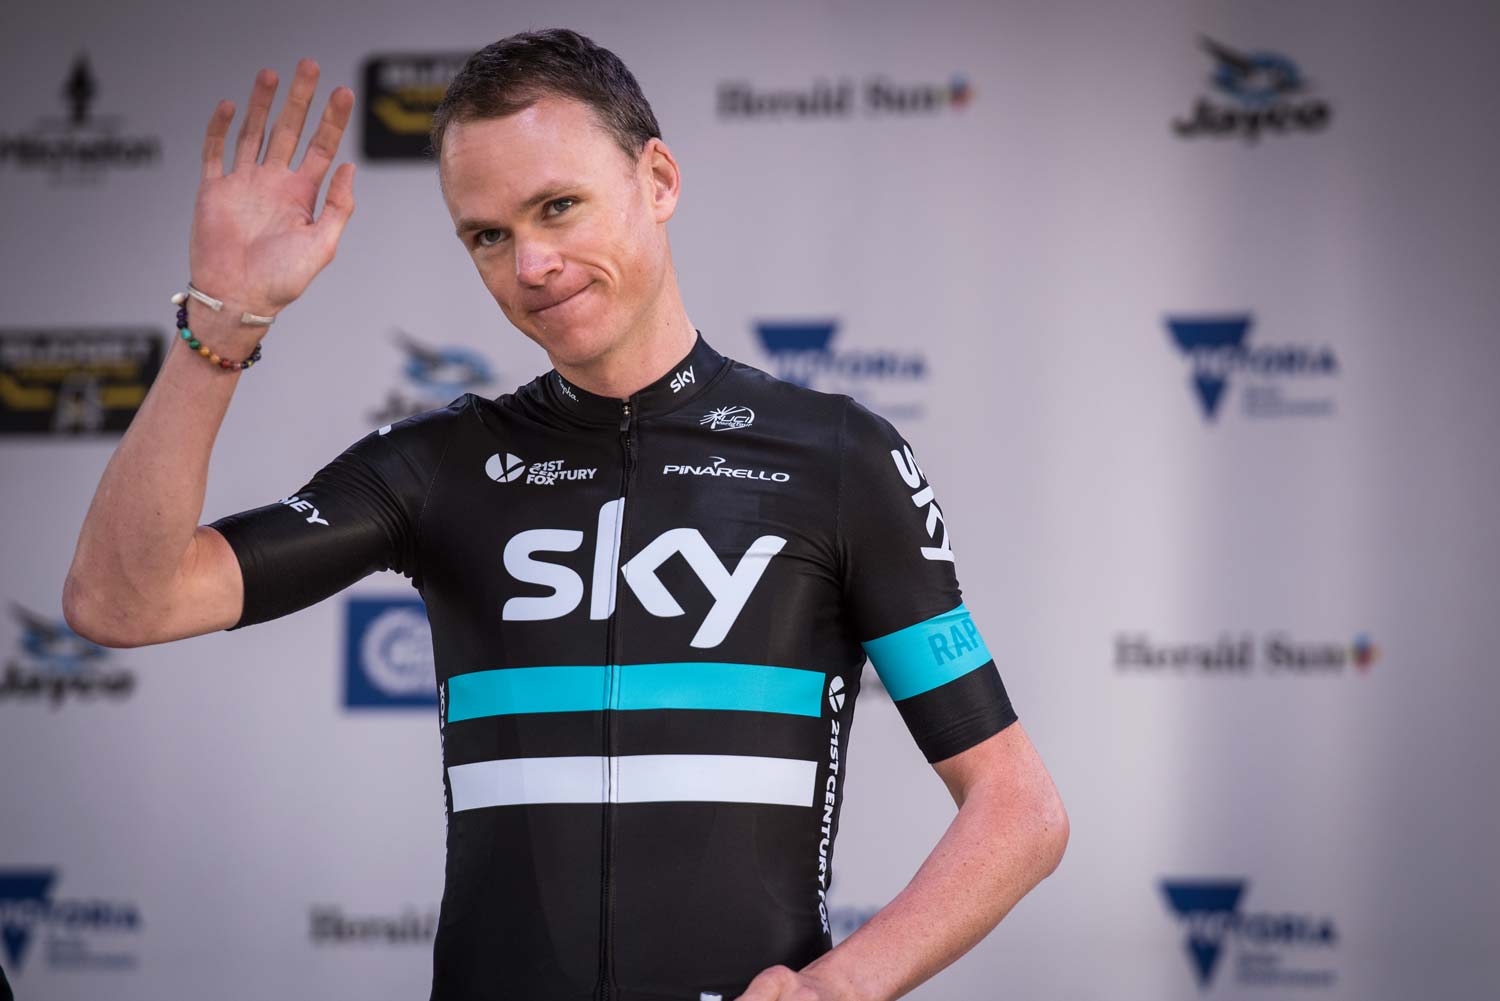 Chris Froome began his 2016 racing campaign at the Jayco-Herald Sun Tour... winning the title in February this year. He'll be back again in 2017. Photo: Kirsty Baxter